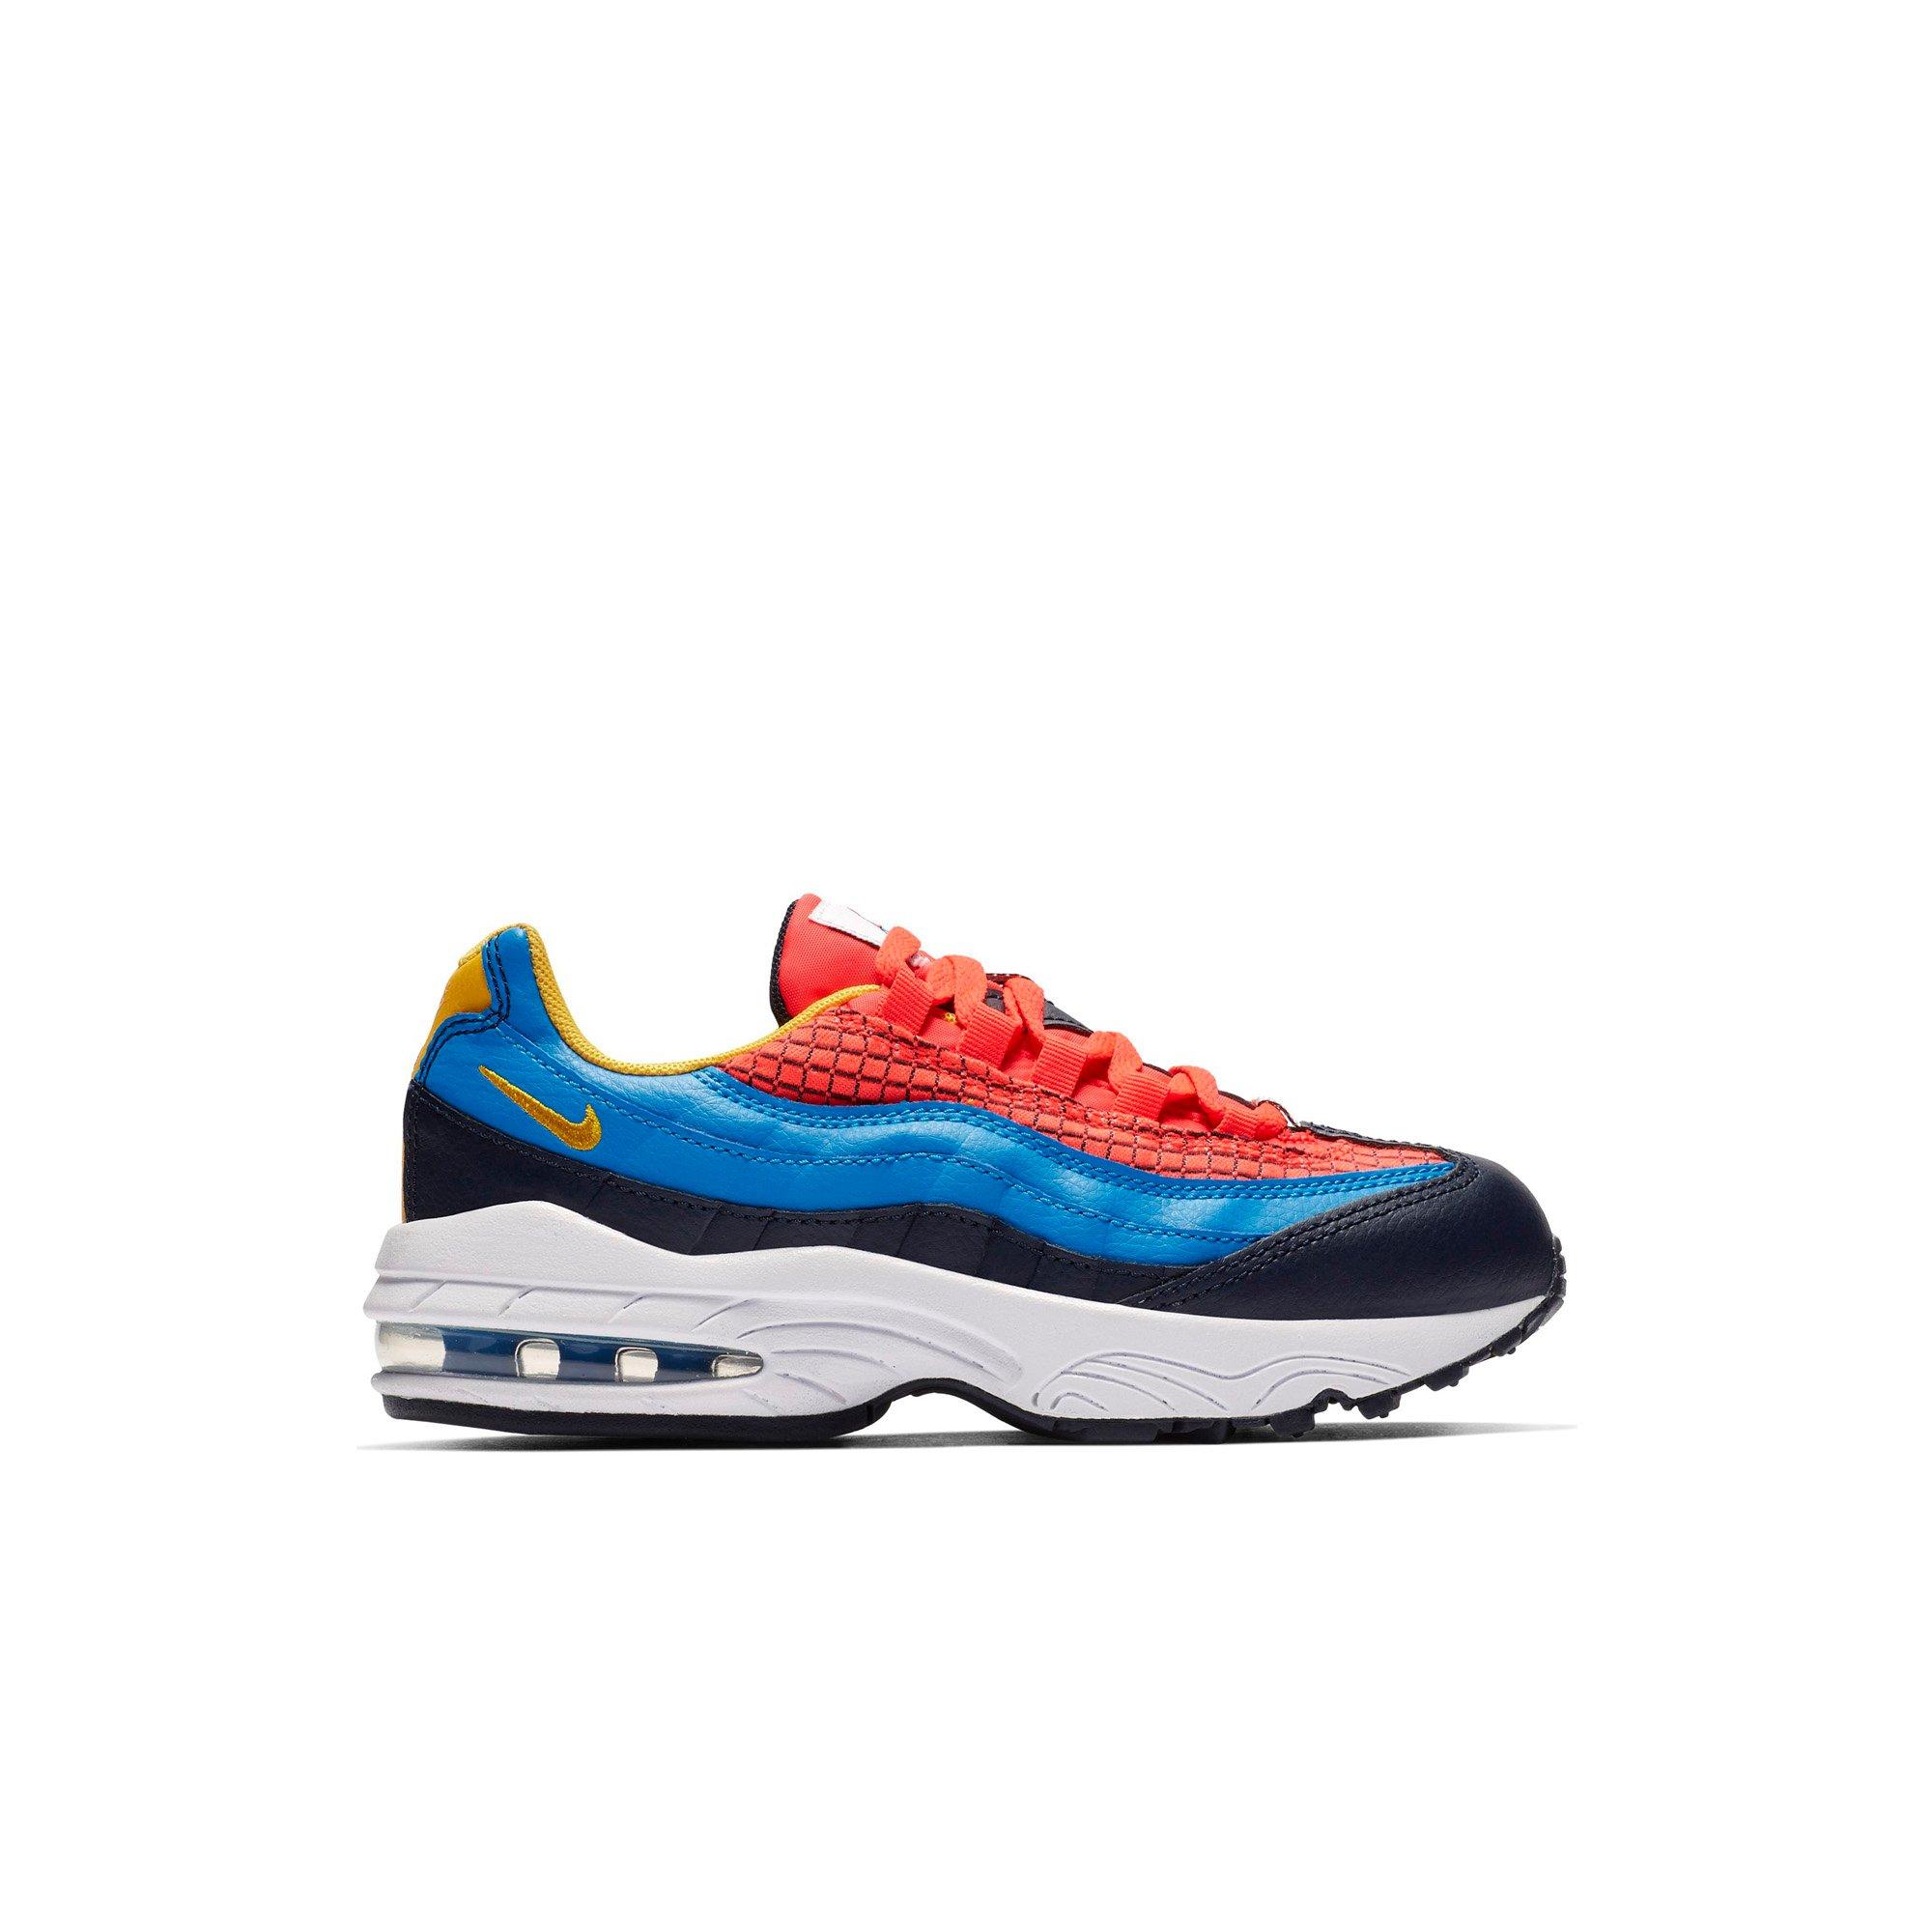 blue and yellow air max 95